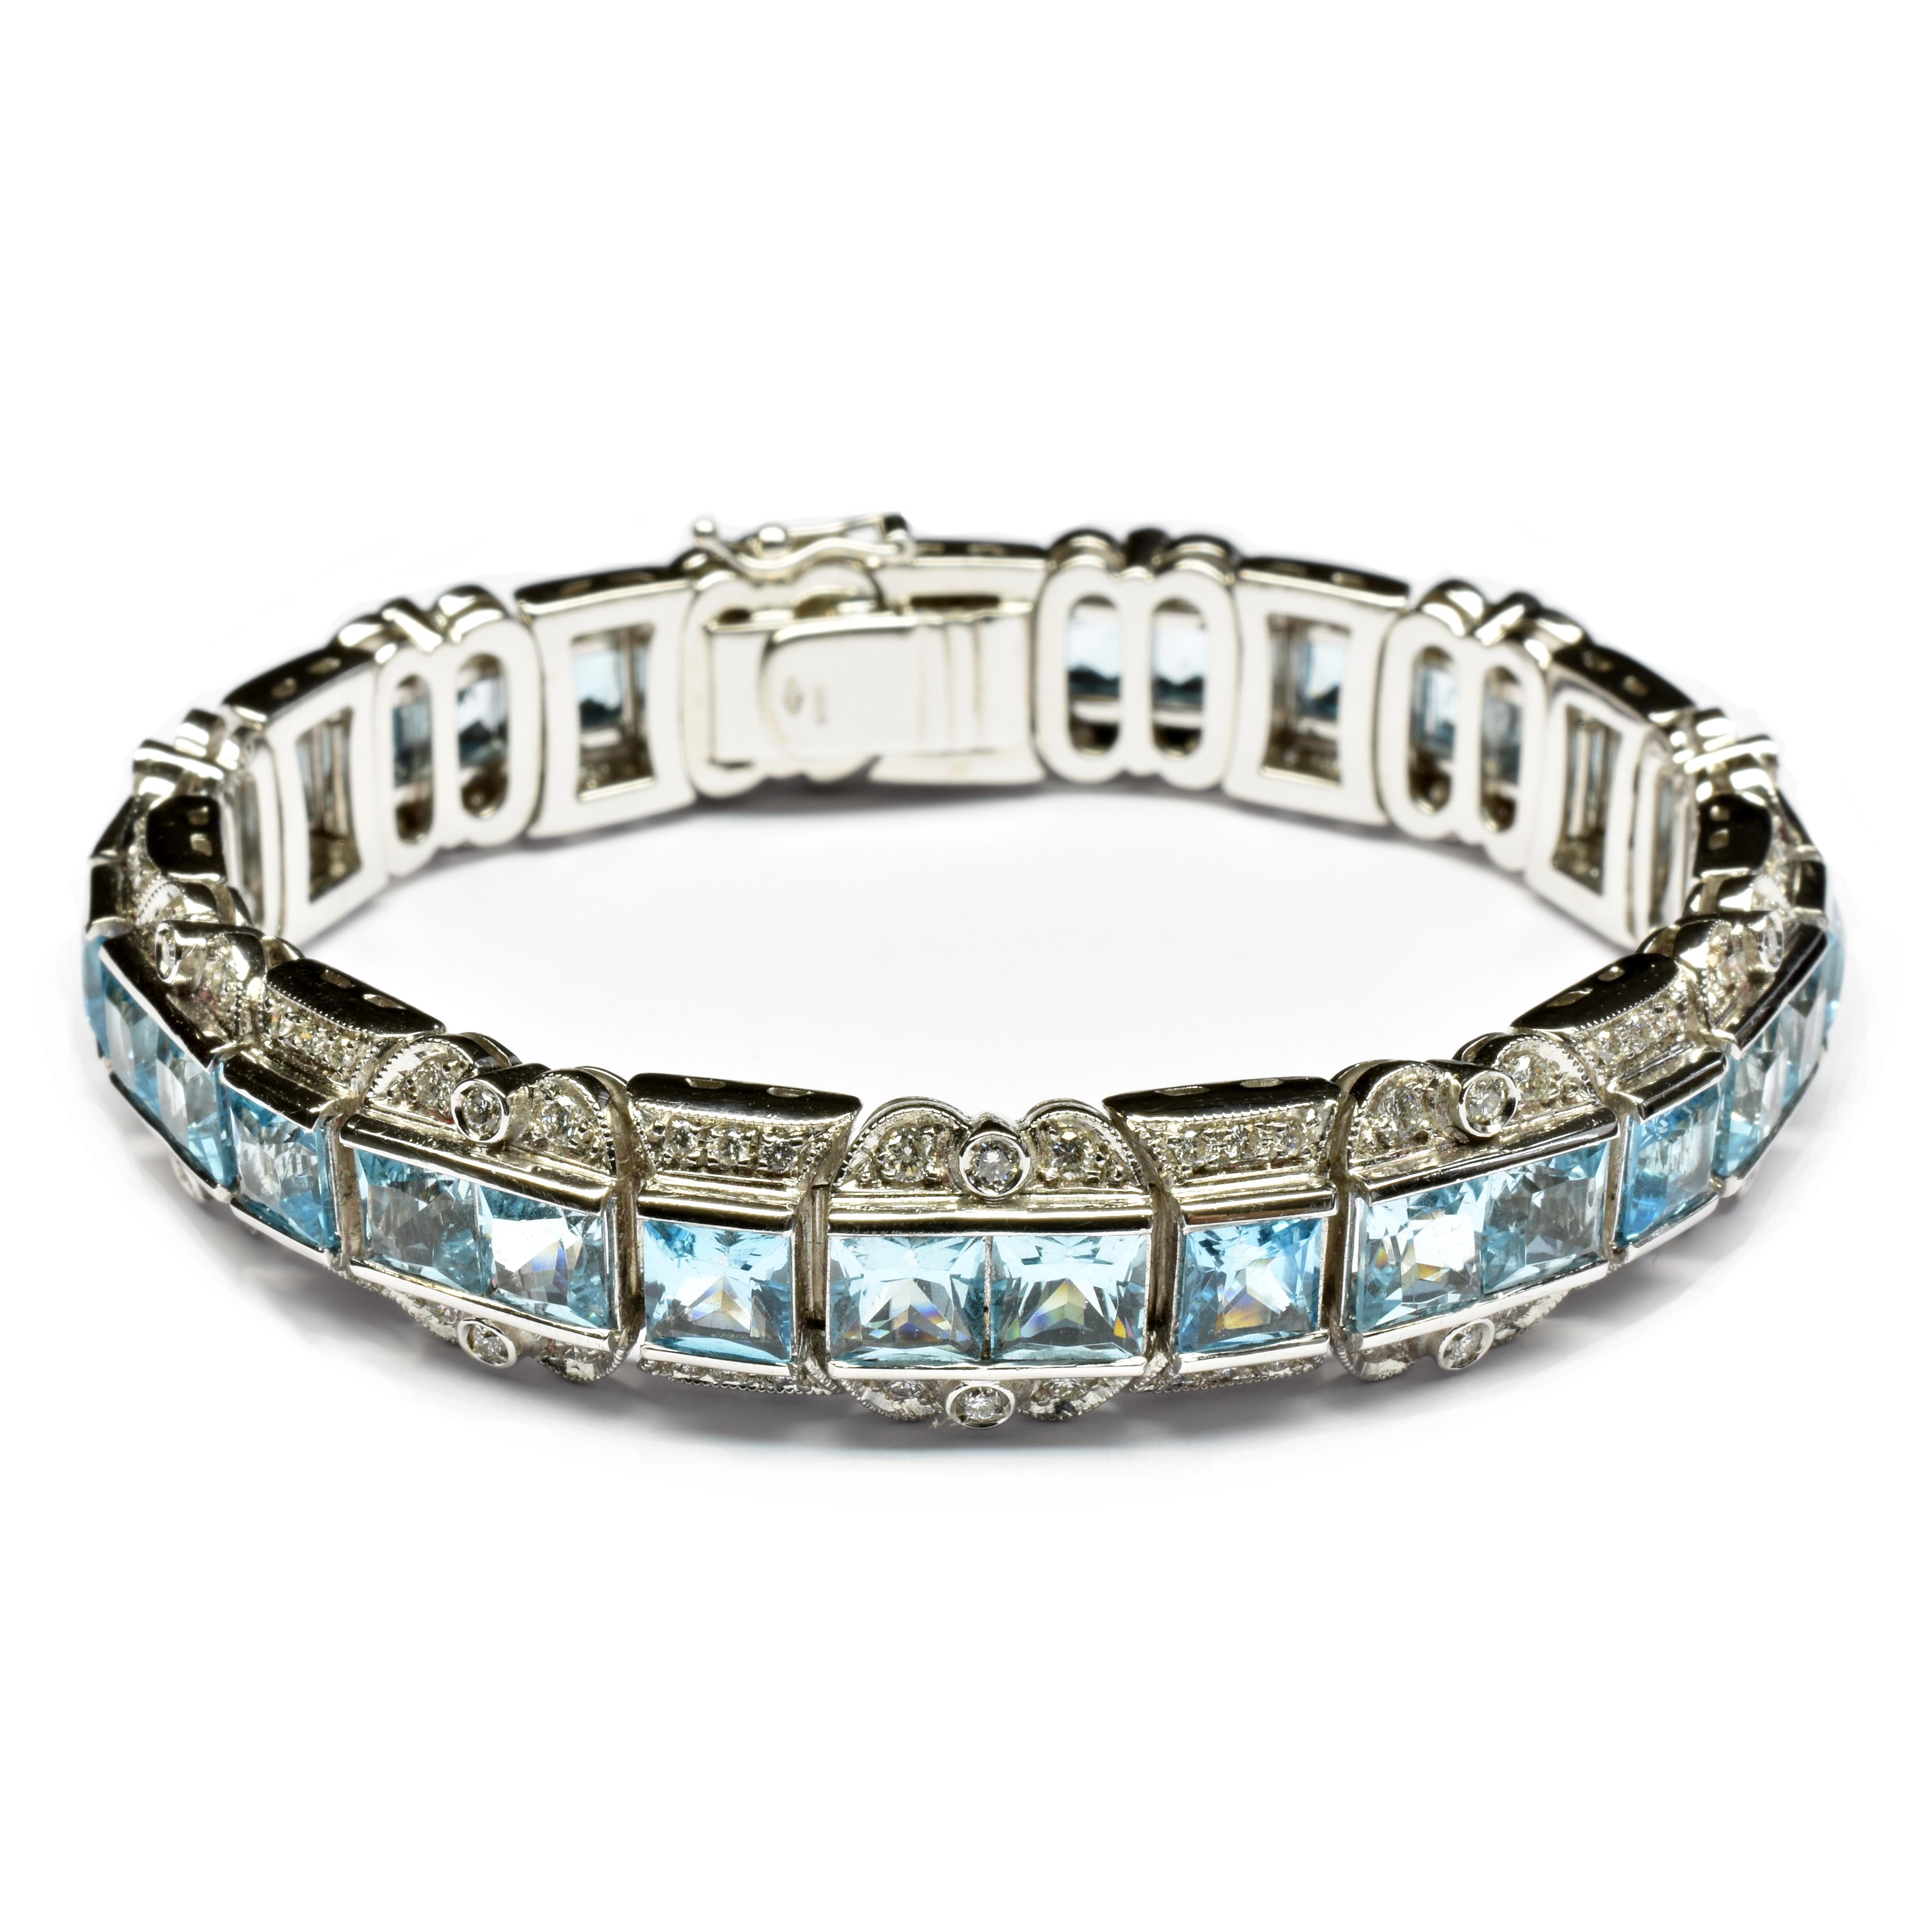 Gilberto Cassola 18 Kt White Gold Bracelet with Princess Cut Blue Topaz and White Diamonds.
Diamonds are with Milgrain Settings that give to this Unique Bracelet a very elegant and classy Art Decò Style.
Very Bright Colour Princess Cut Topaz.  
One